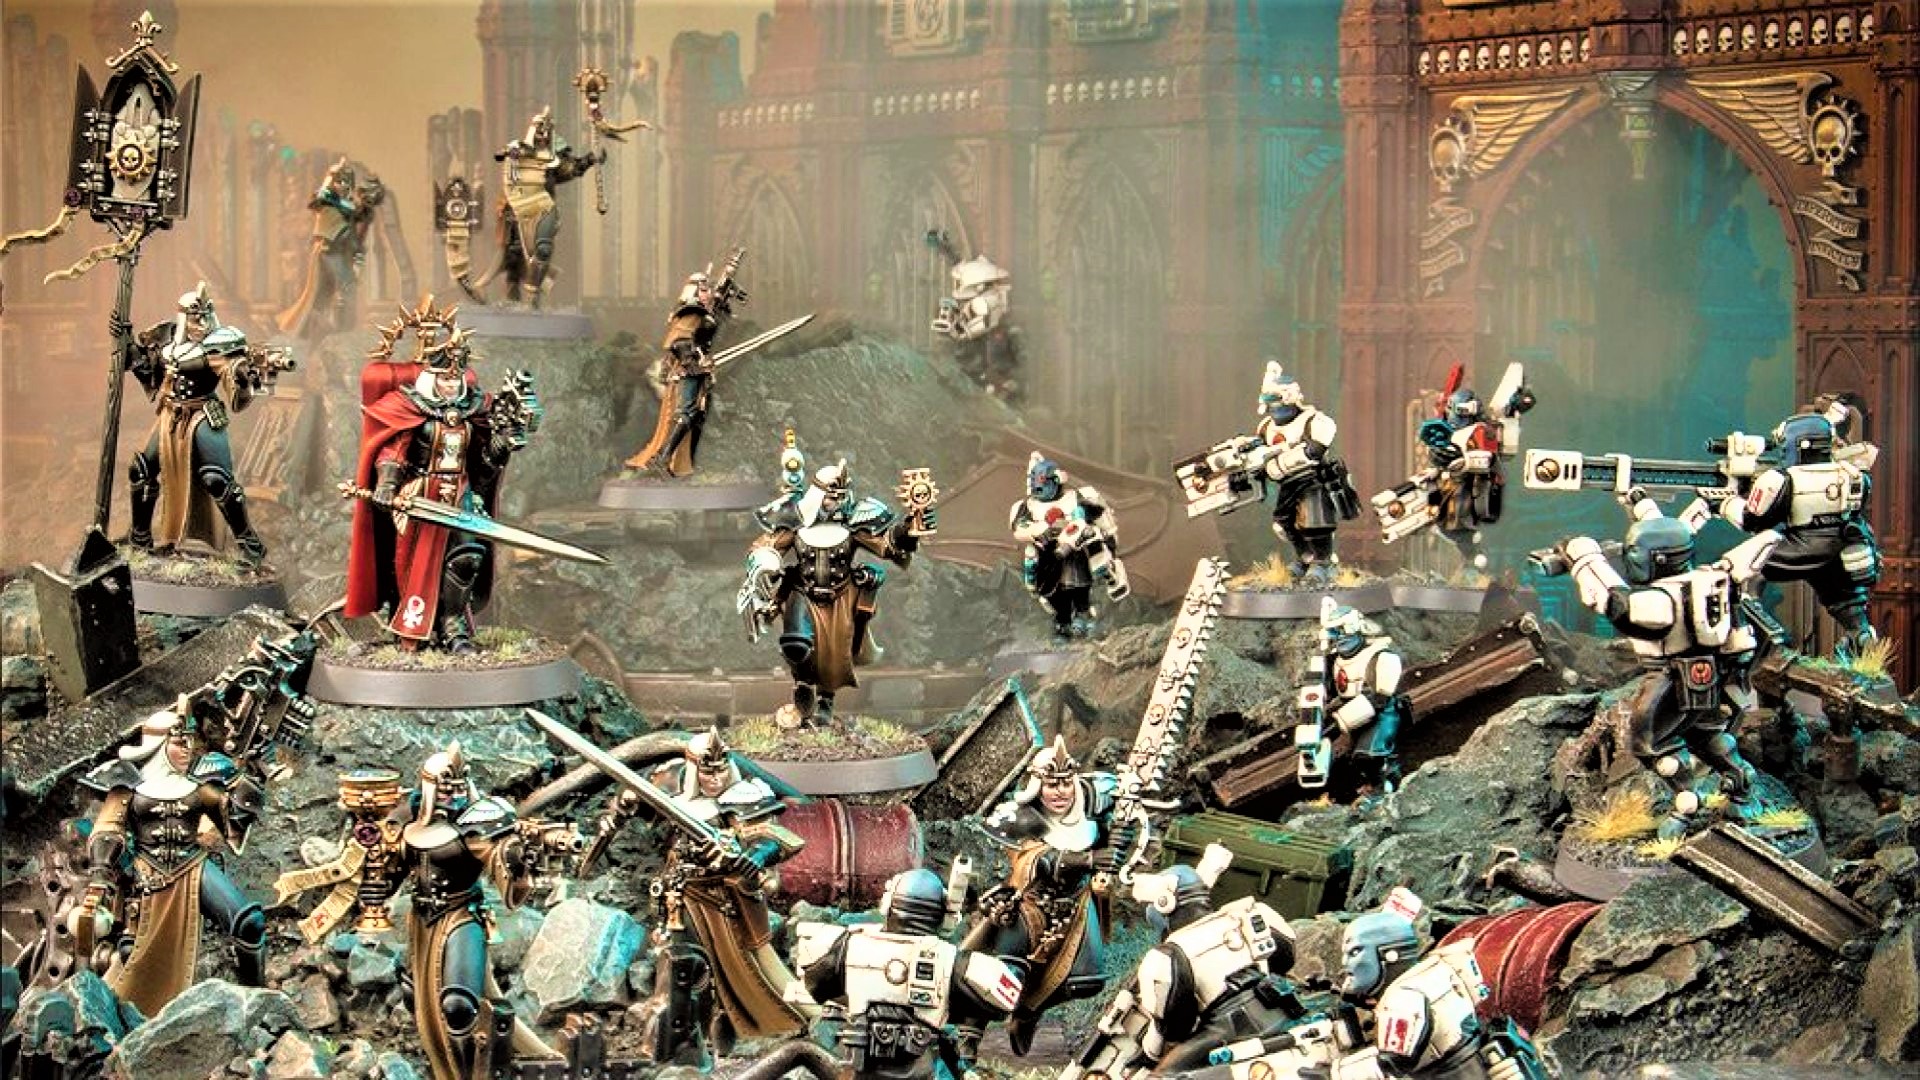 Thousand Sons - New